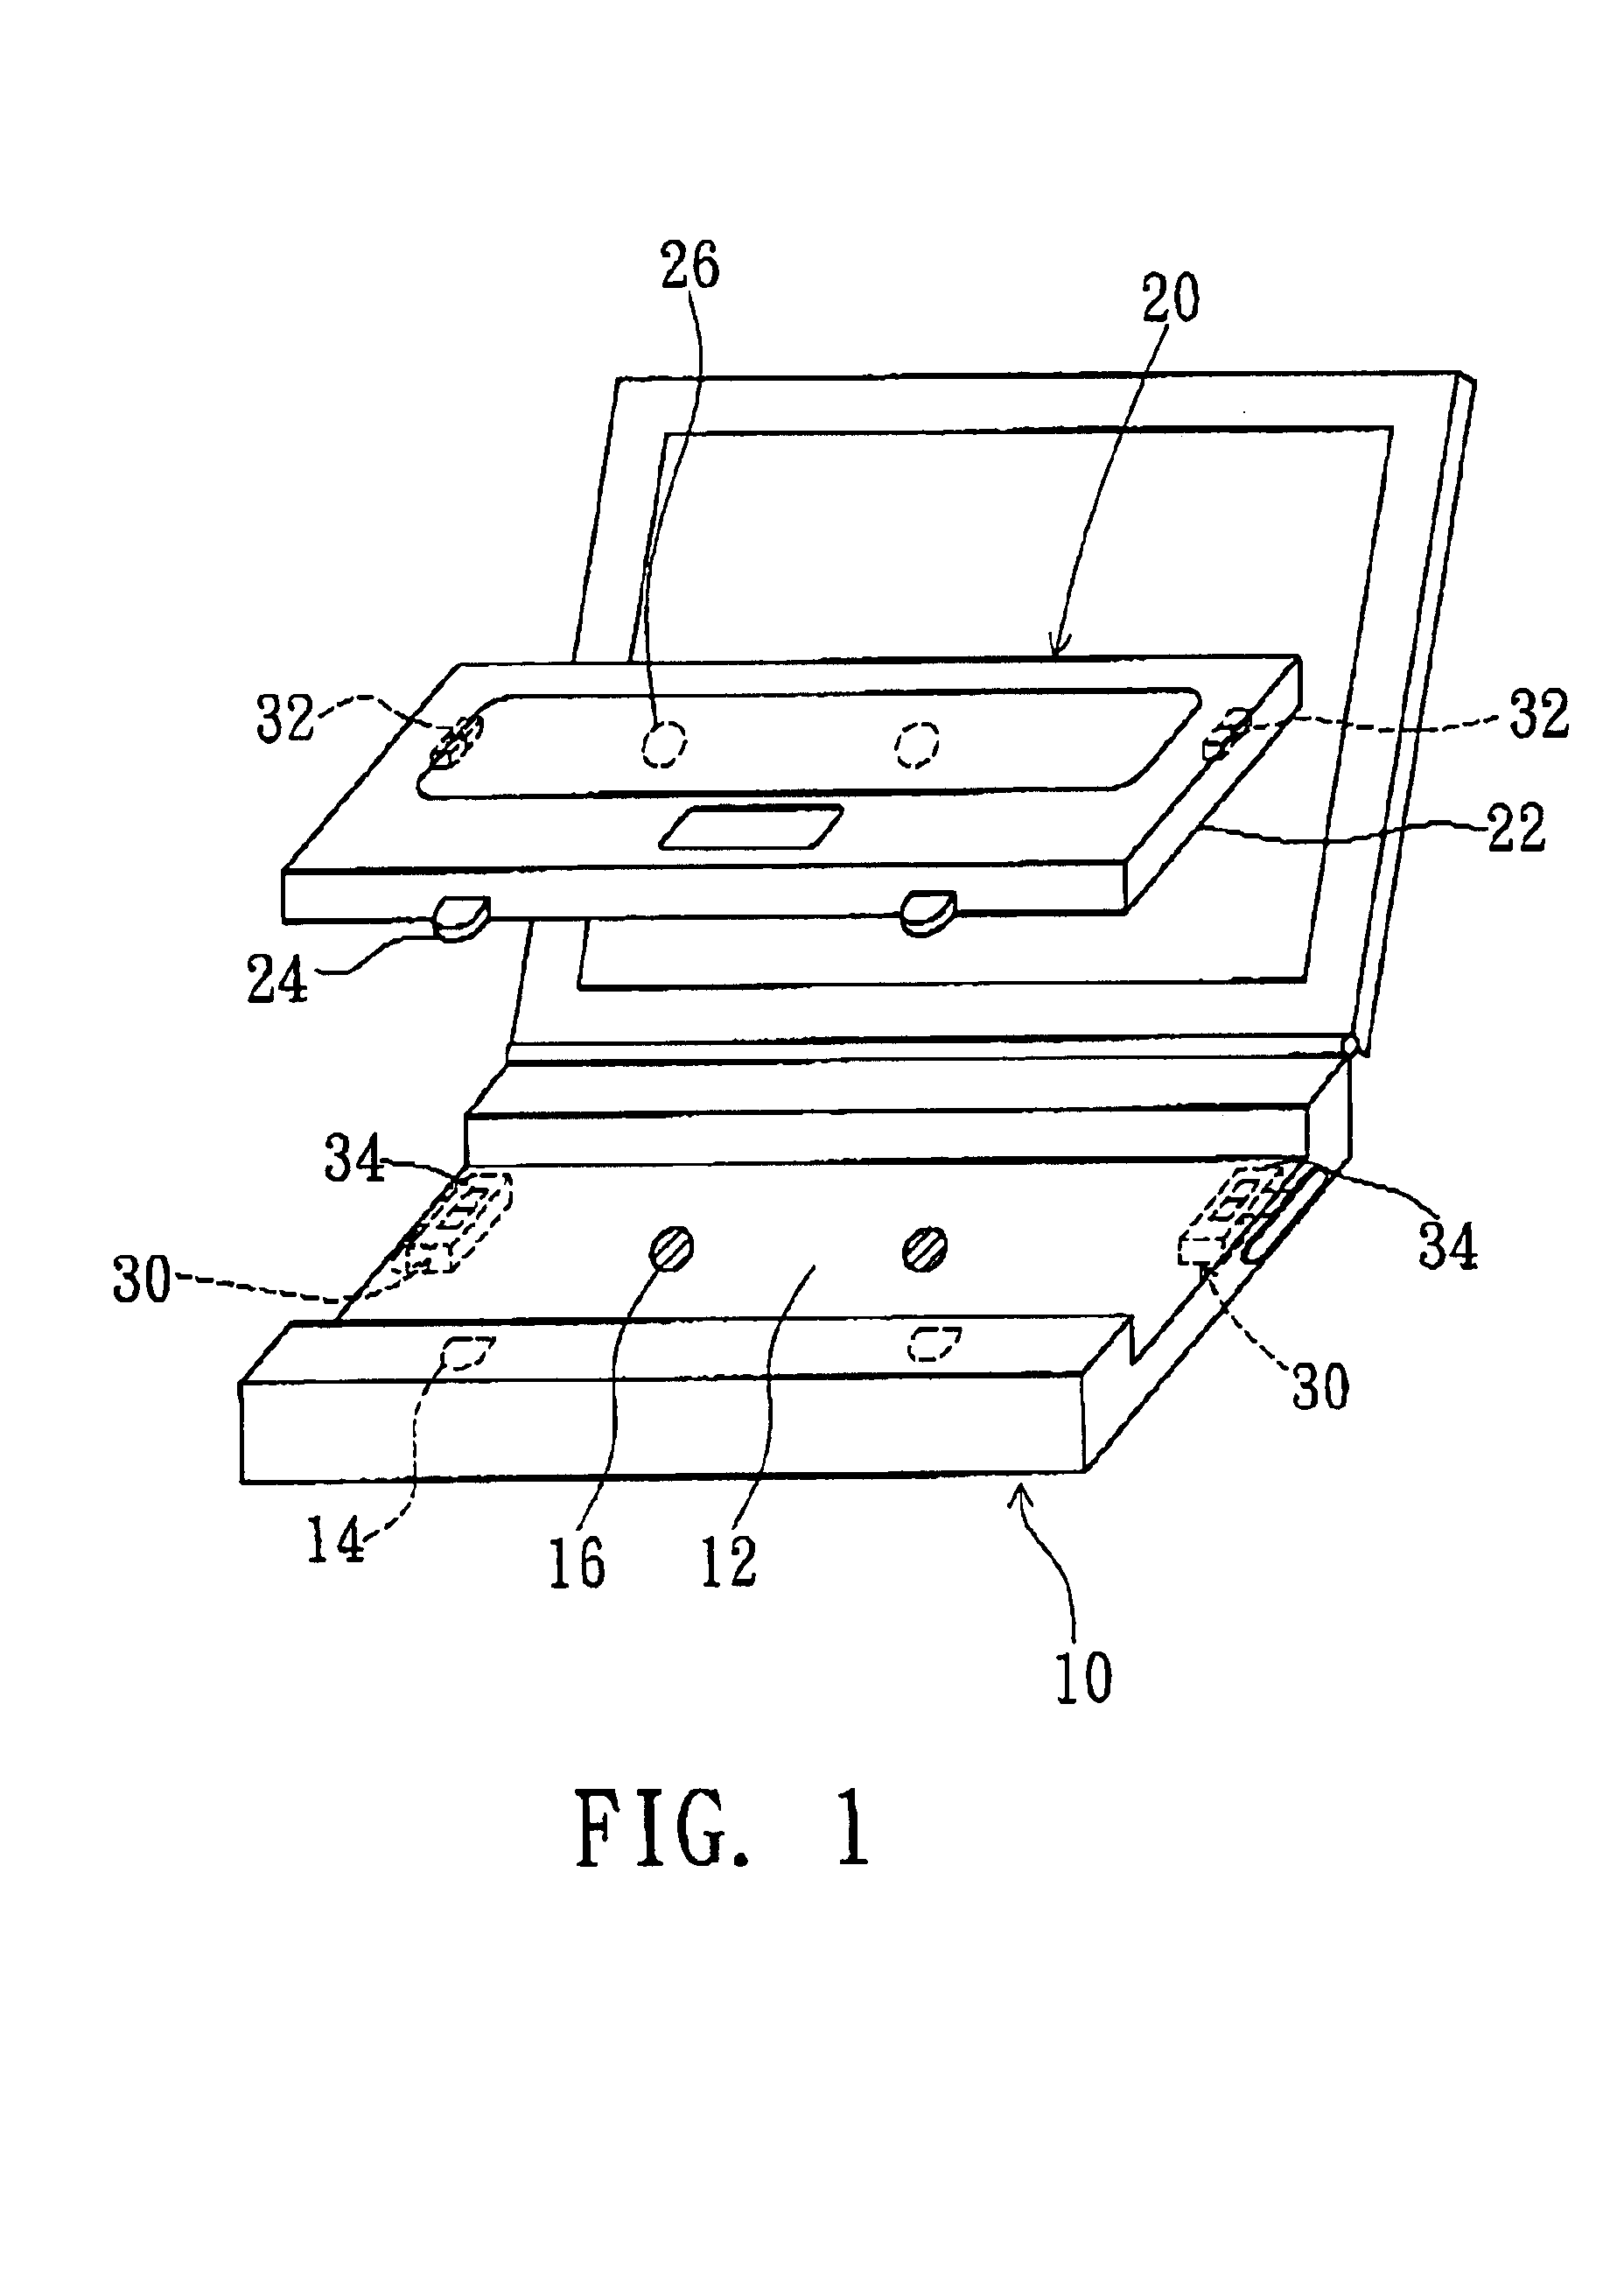 Detachable keyboard structure